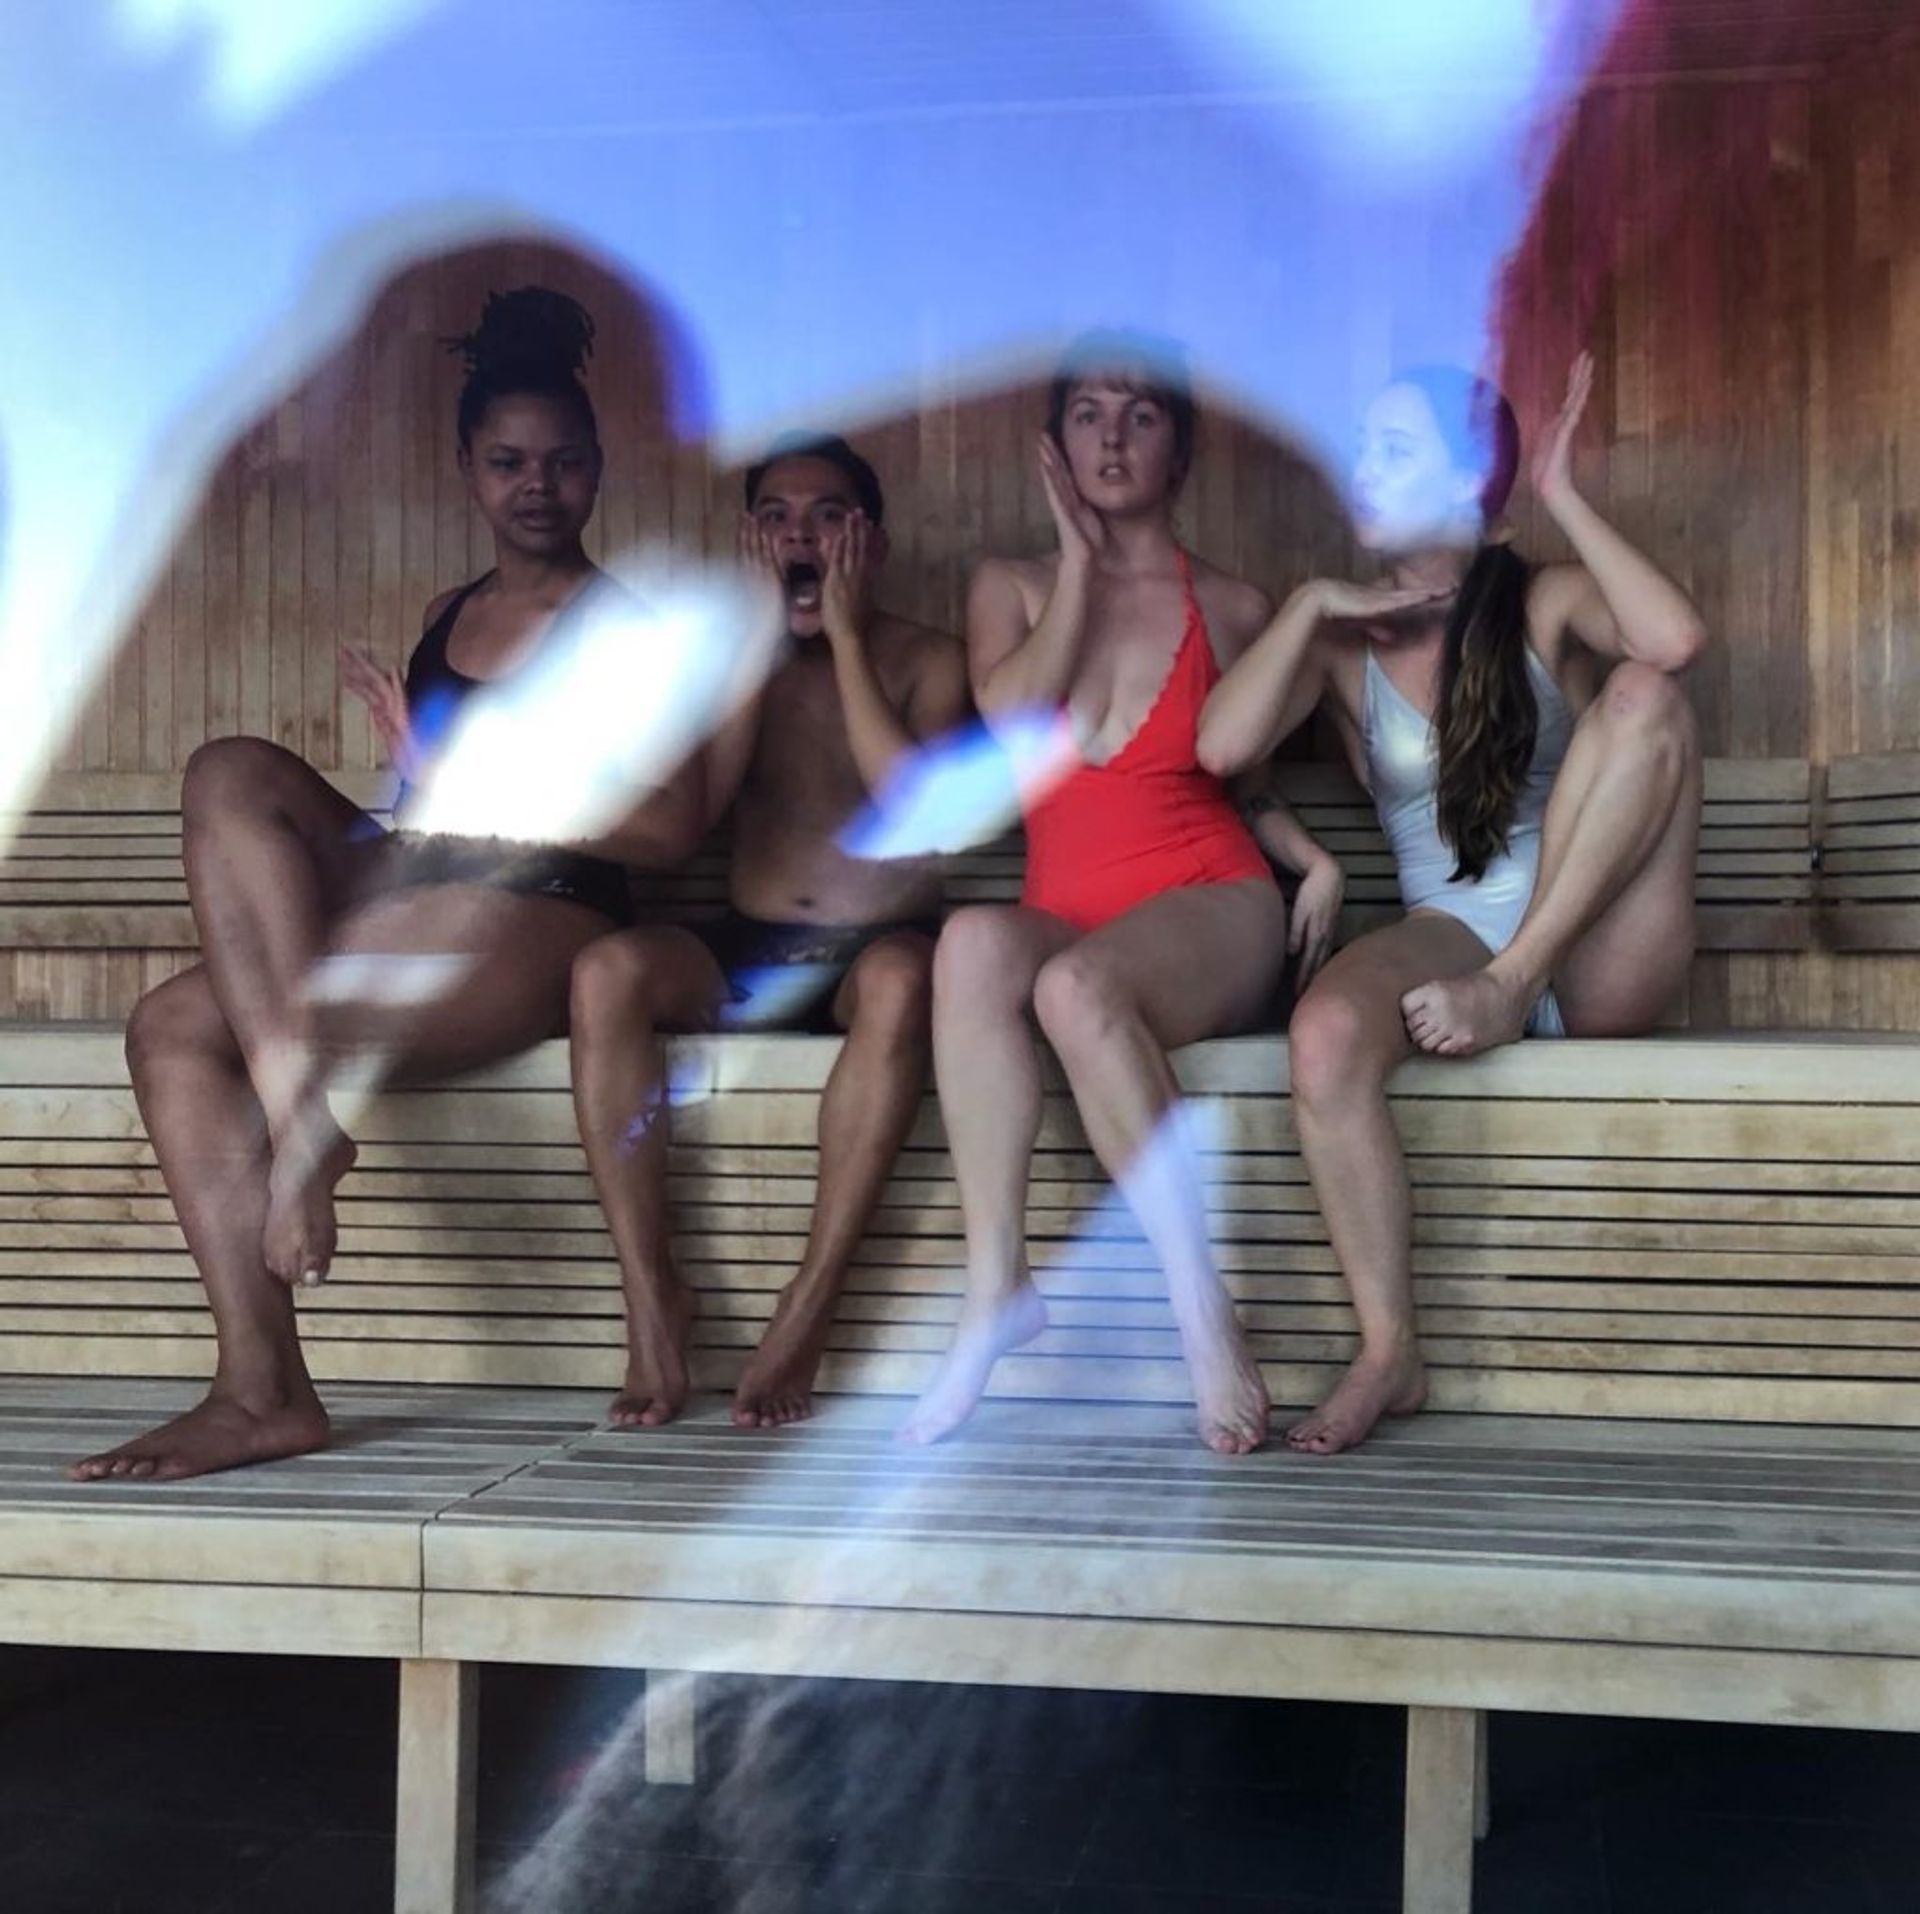 Four students sitting in a sauna.